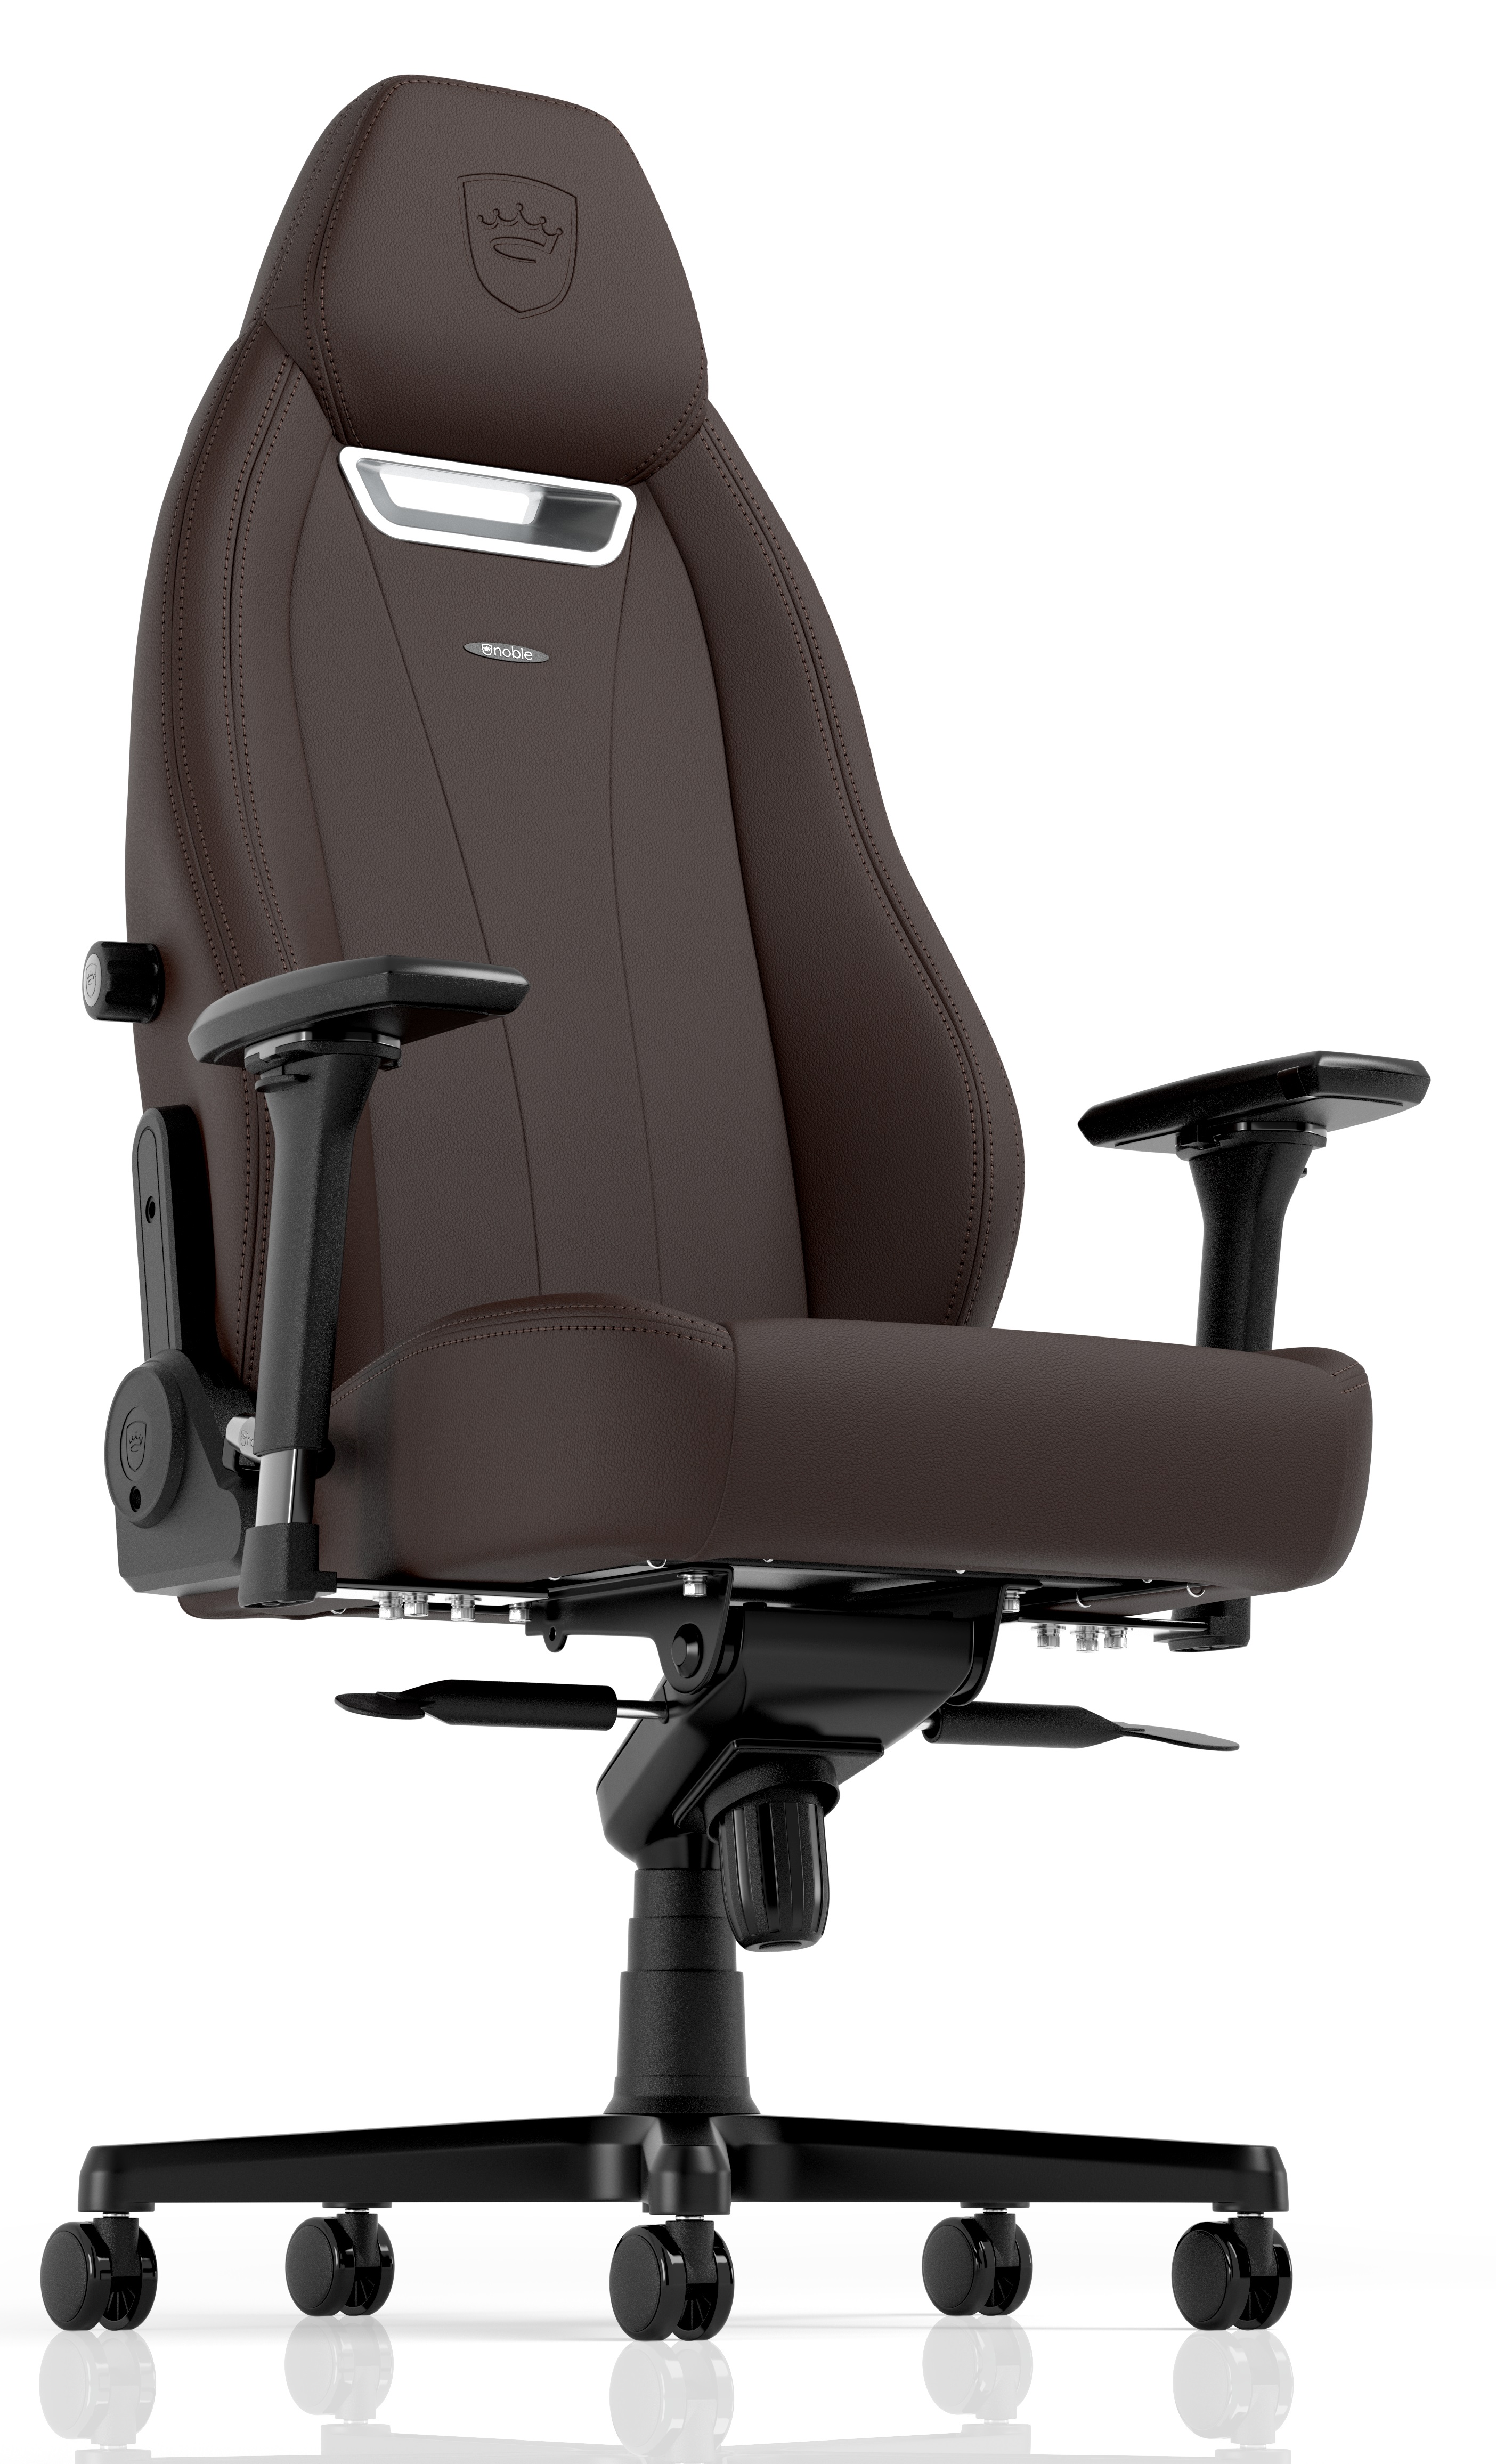 noblechairs - noblechairs LEGEND Gaming Chair Java Edition – High-tech PU Leather